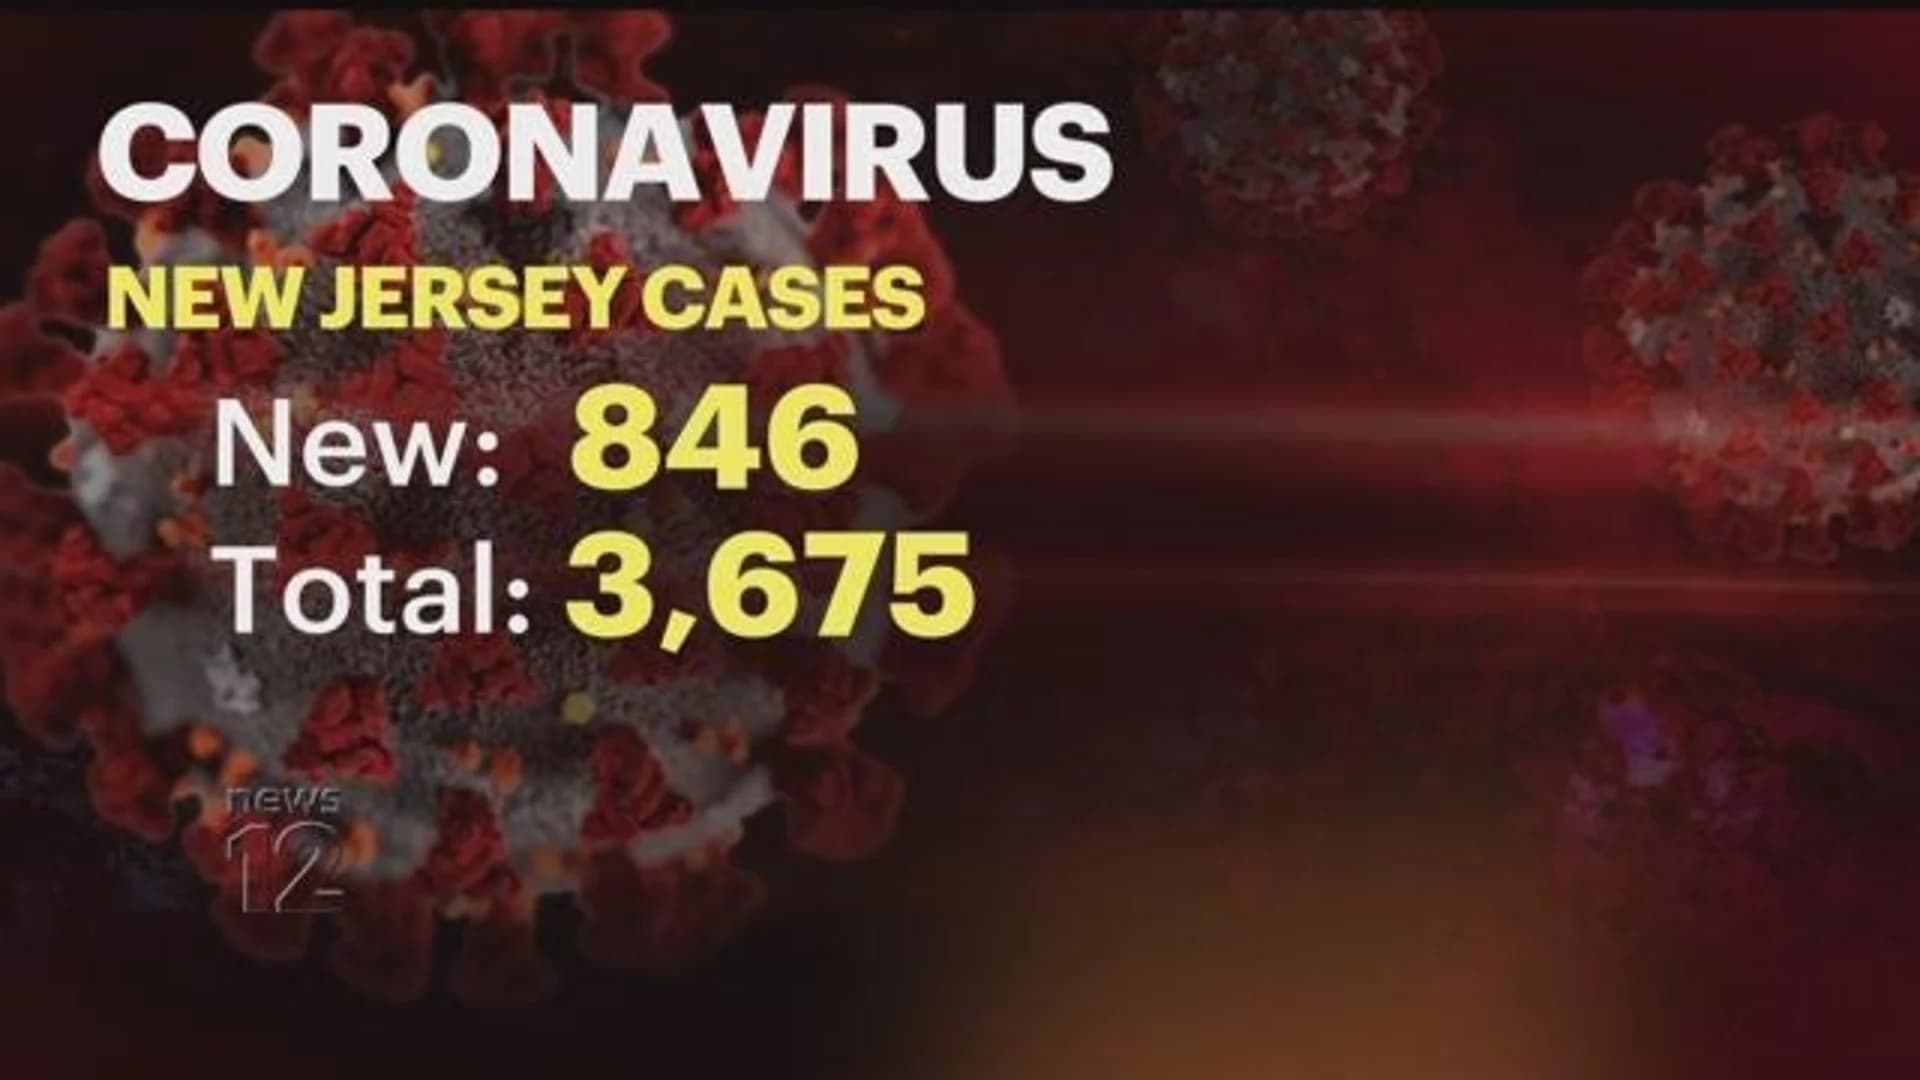 State: 3,675 cases of coronavirus across New Jersey. Here is a county by county breakdown